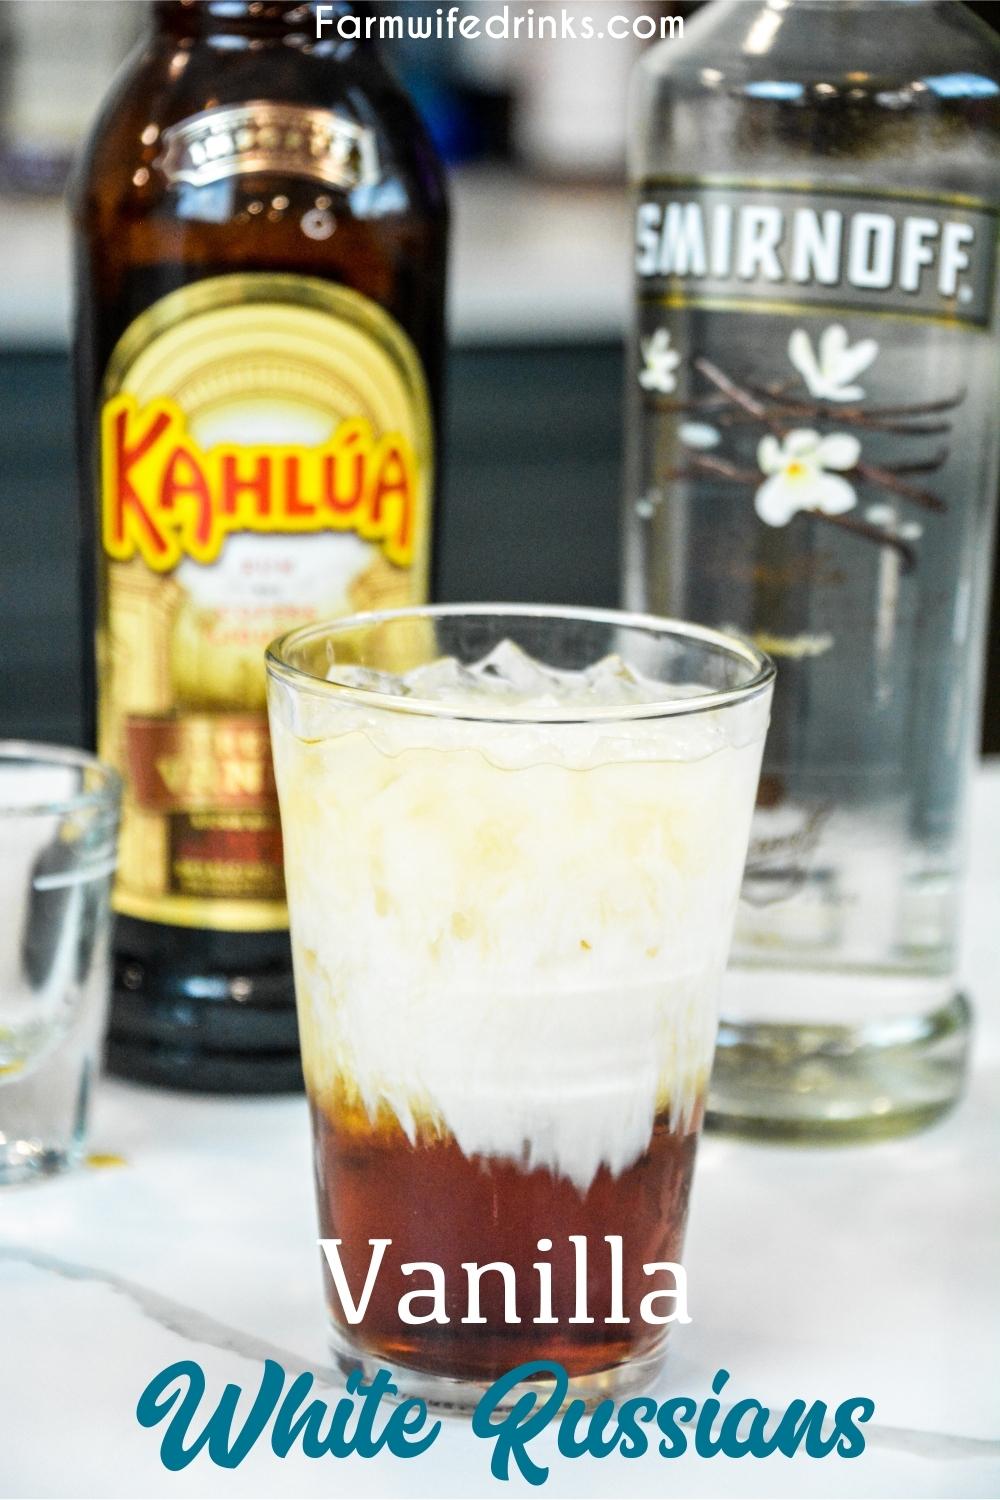 Vanilla White Russian is vanilla vodka and vanilla Kahlua combines together with cream for a perfect after-dinner drink of the morning vanilla latte.